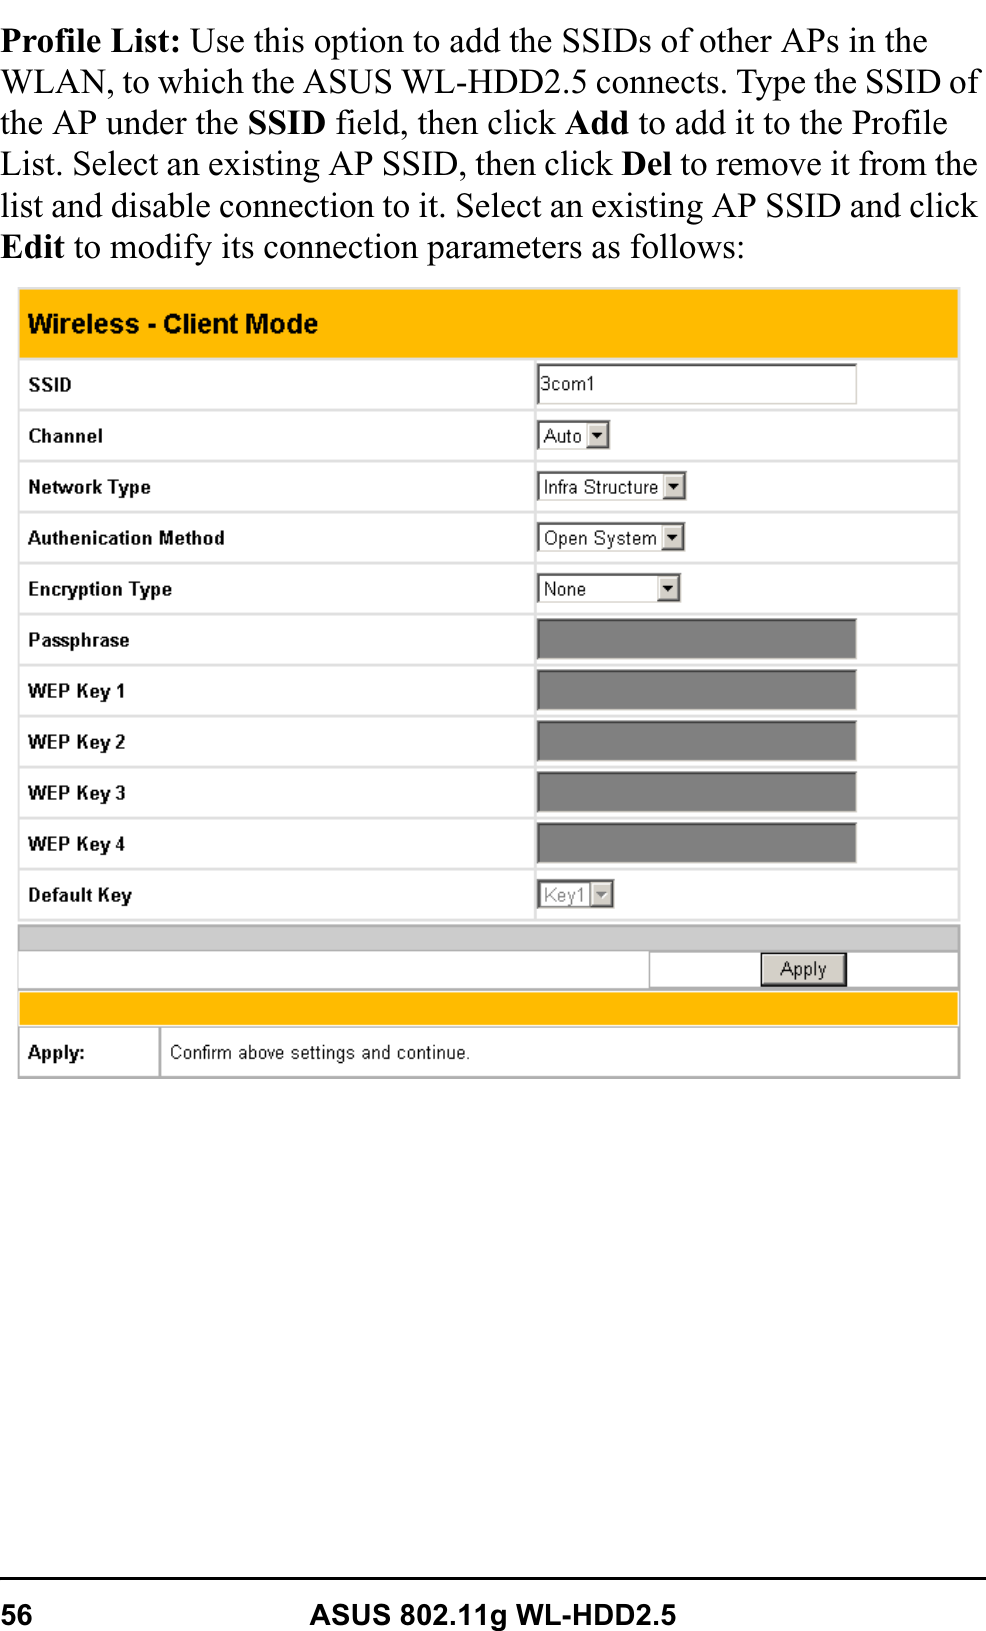 56 ASUS 802.11g WL-HDD2.5Profile List: Use this option to add the SSIDs of other APs in the WLAN, to which the ASUS WL-HDD2.5 connects. Type the SSID of the AP under the SSID field, then click Add to add it to the Profile List. Select an existing AP SSID, then click Del to remove it from the list and disable connection to it. Select an existing AP SSID and click Edit to modify its connection parameters as follows: